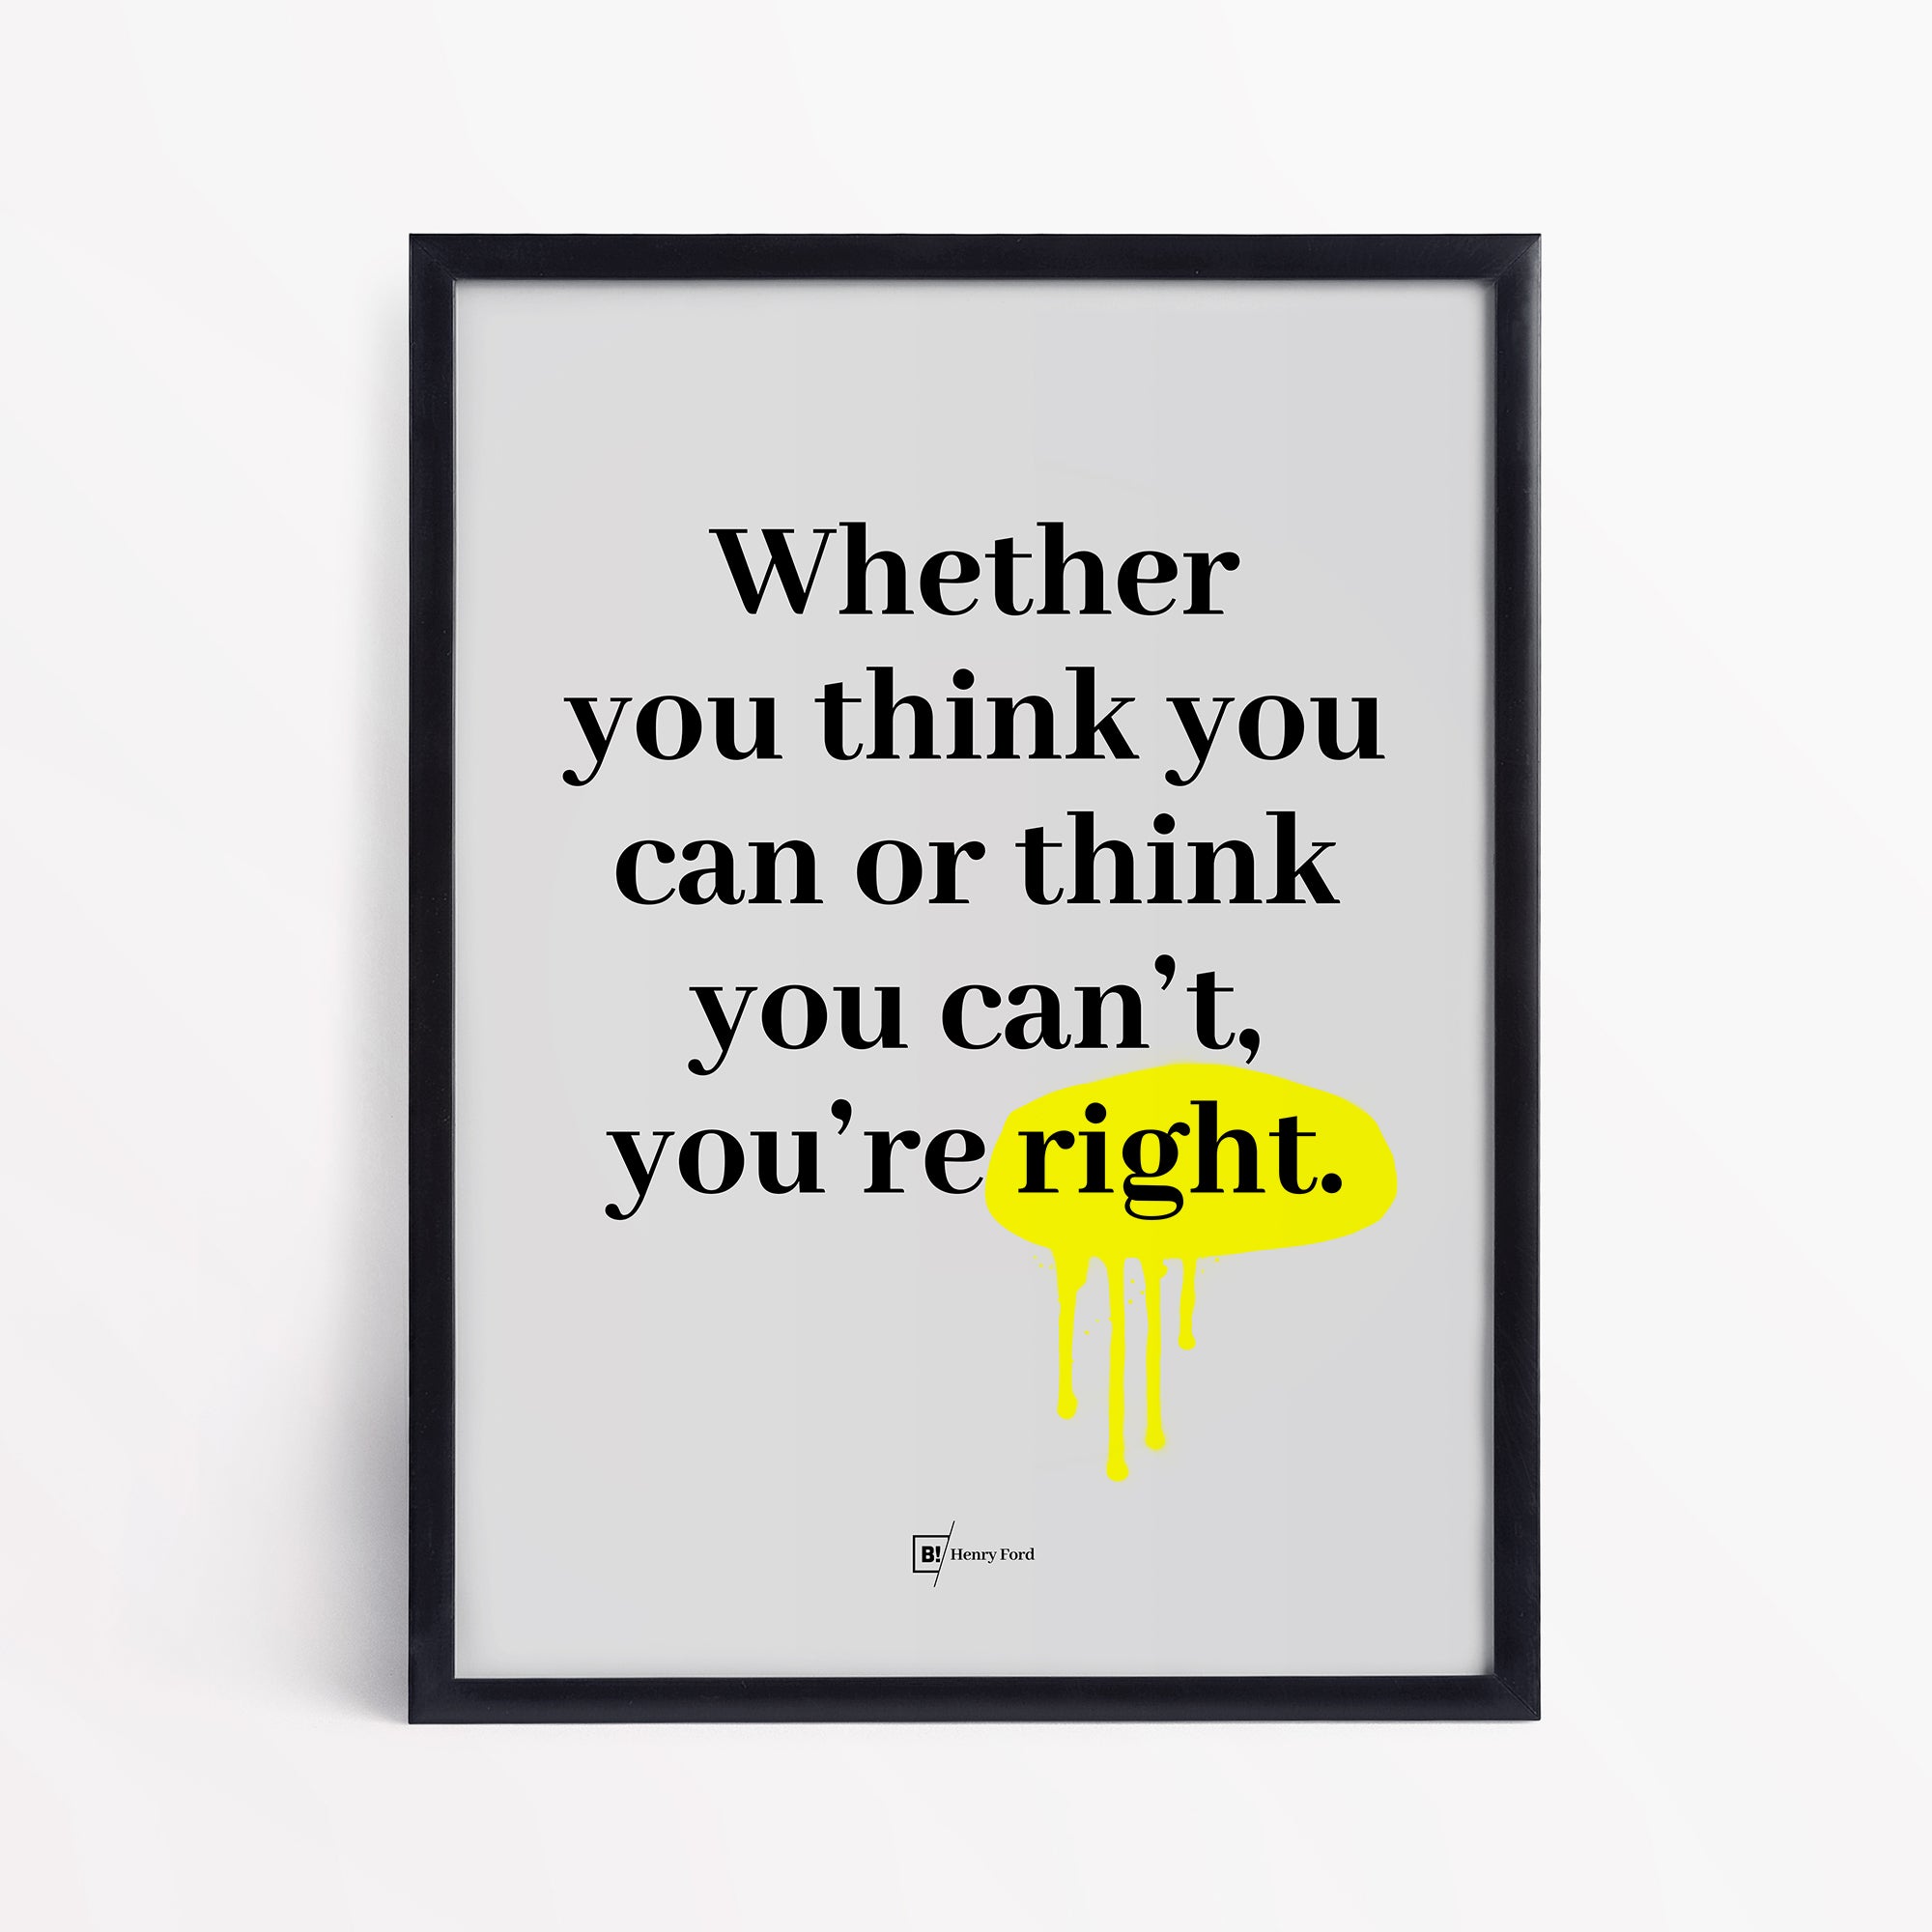 Be inspired by Henry Ford's famous "Whether you think you can or think you can't, you're right" quote art print. This artwork was printed using the giclée process on archival acid-free paper and is presented in a simple black frame that captures its timeless beauty in every detail.